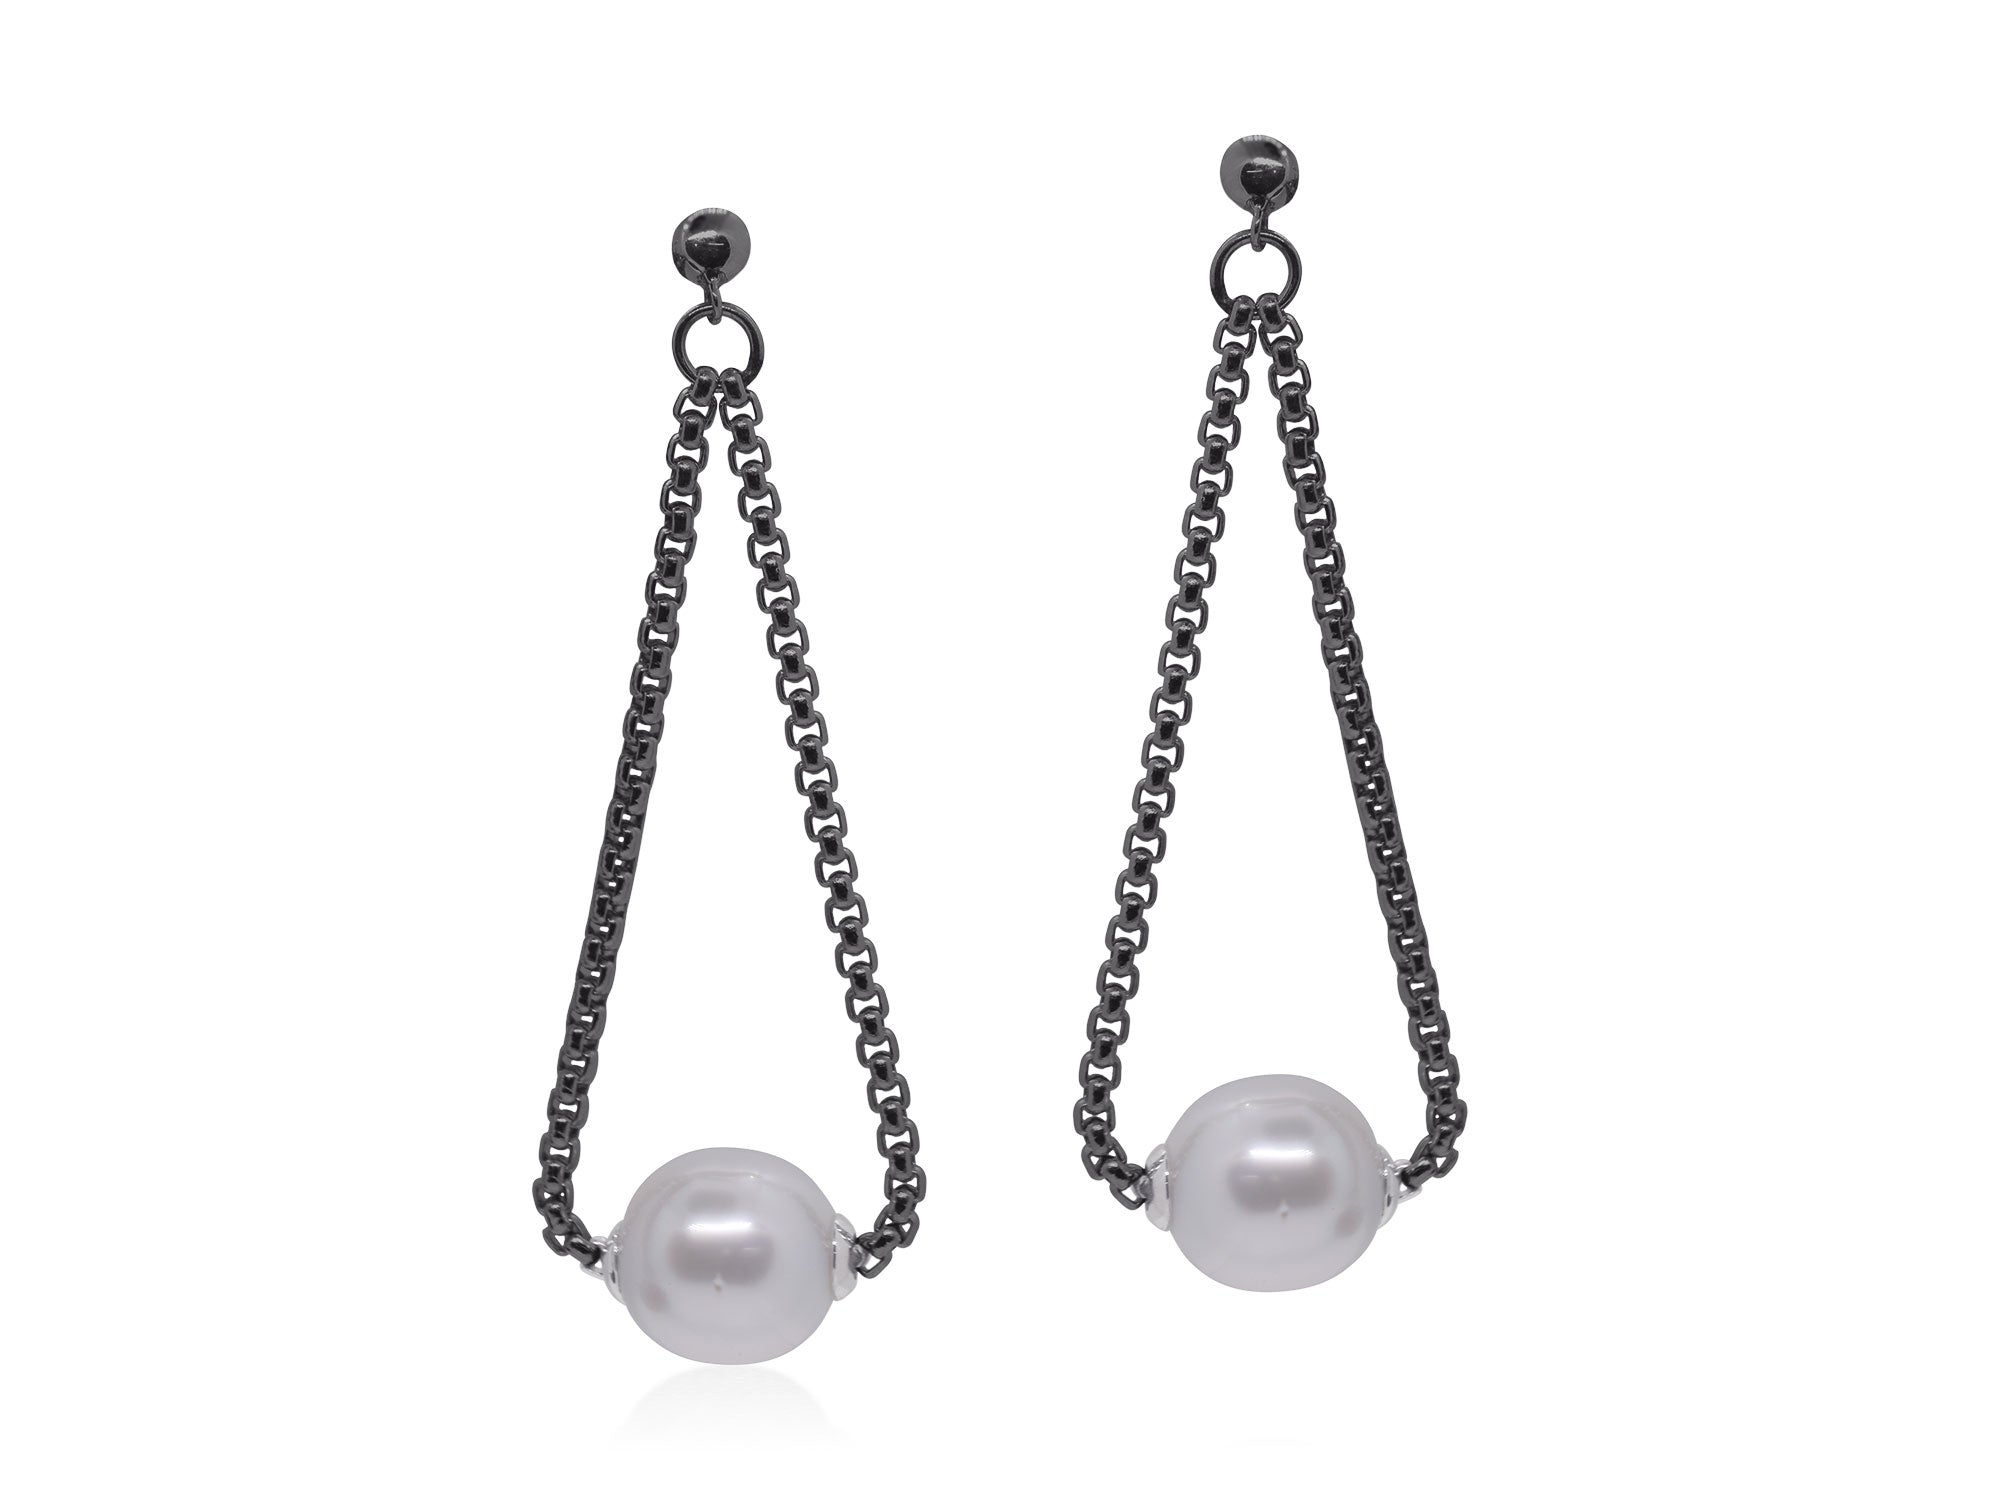 Black Chain Drop Earrings with South Sea Pearls